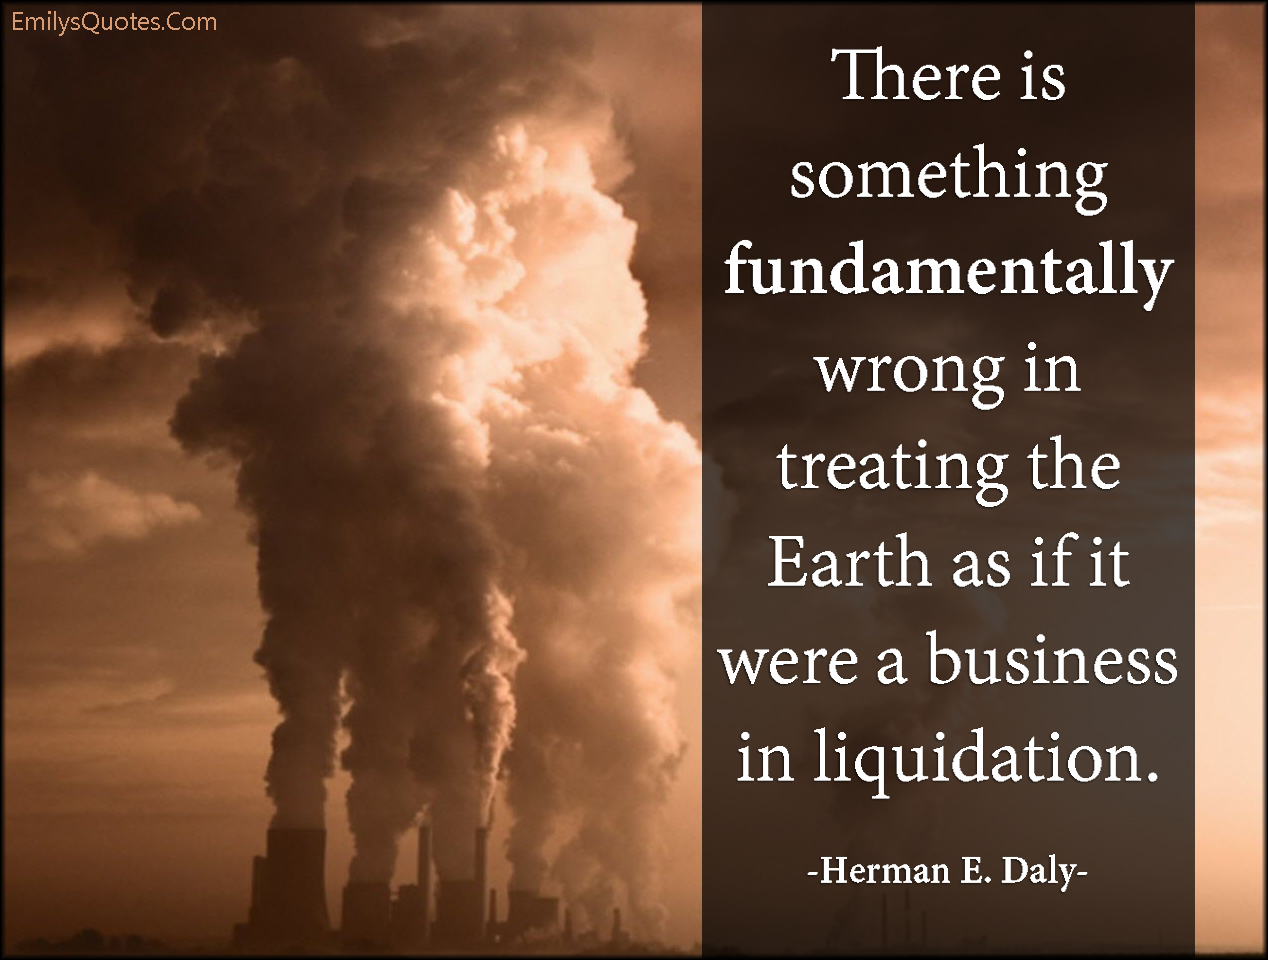 There is something fundamentally wrong in treating the Earth as if it were a business in liquidation